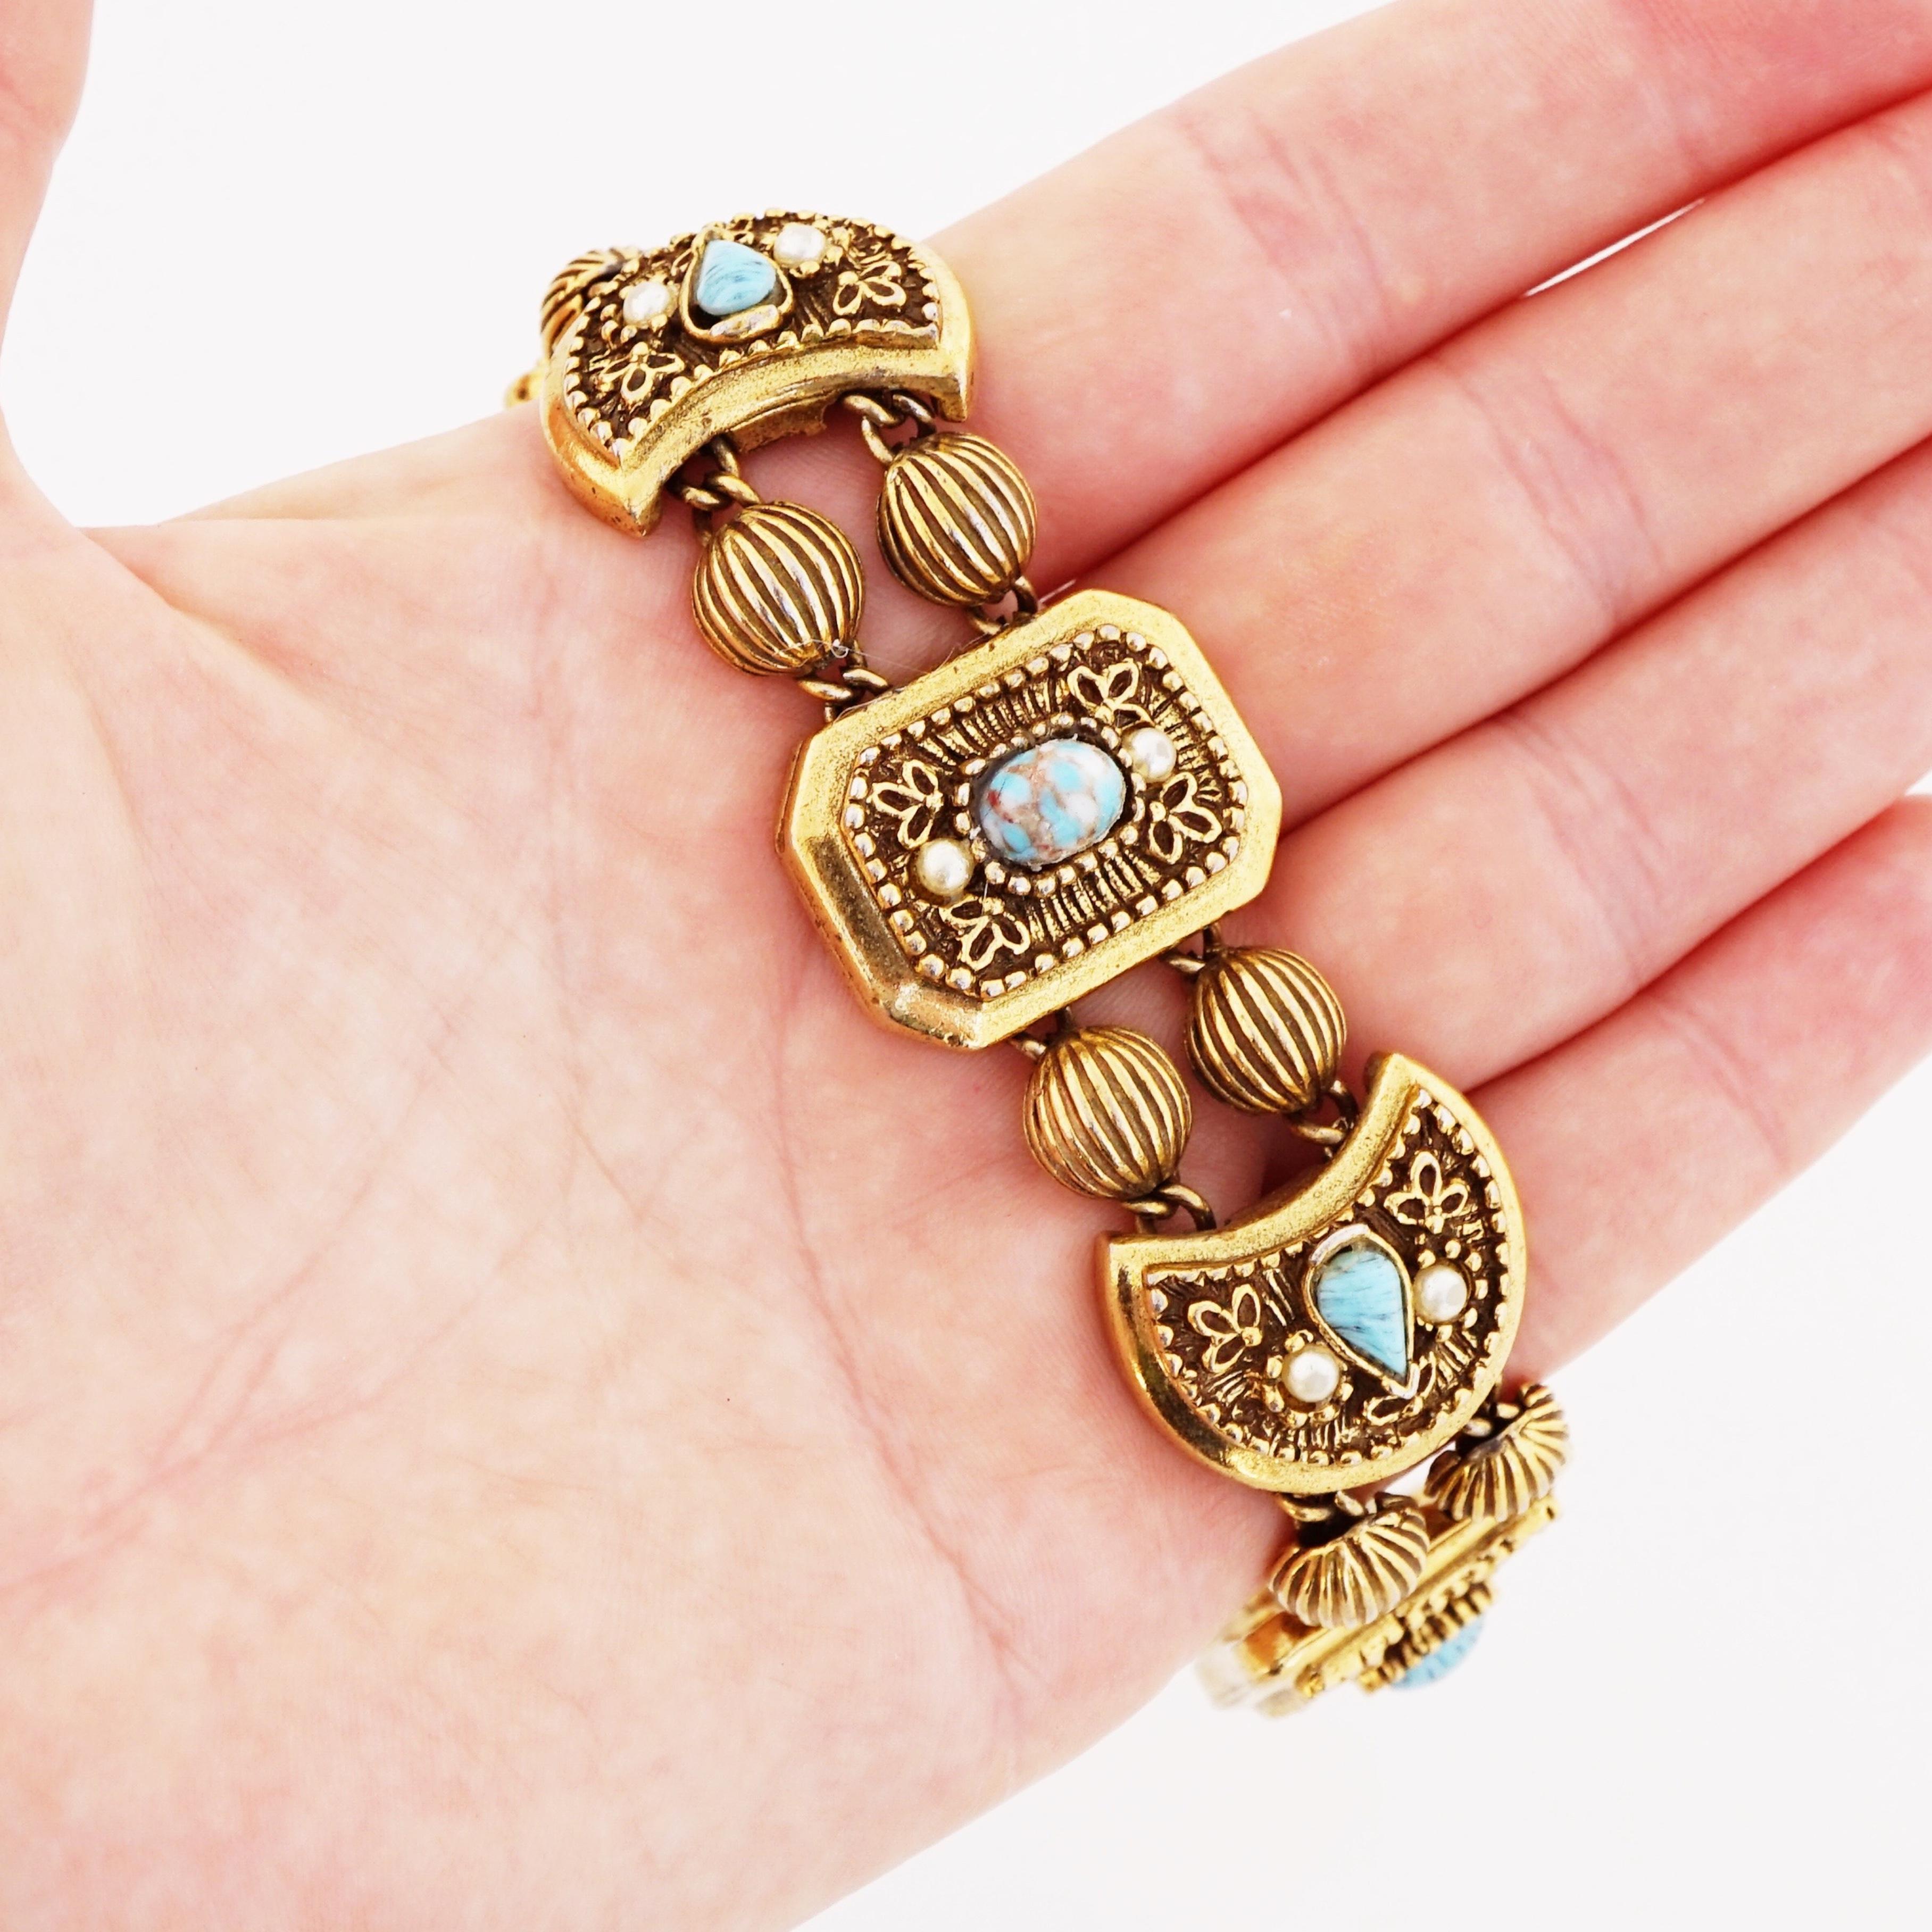 Women's 1960s Goldette Victorian Revival Ornate Link Bracelet With Turquoise Cabochons For Sale